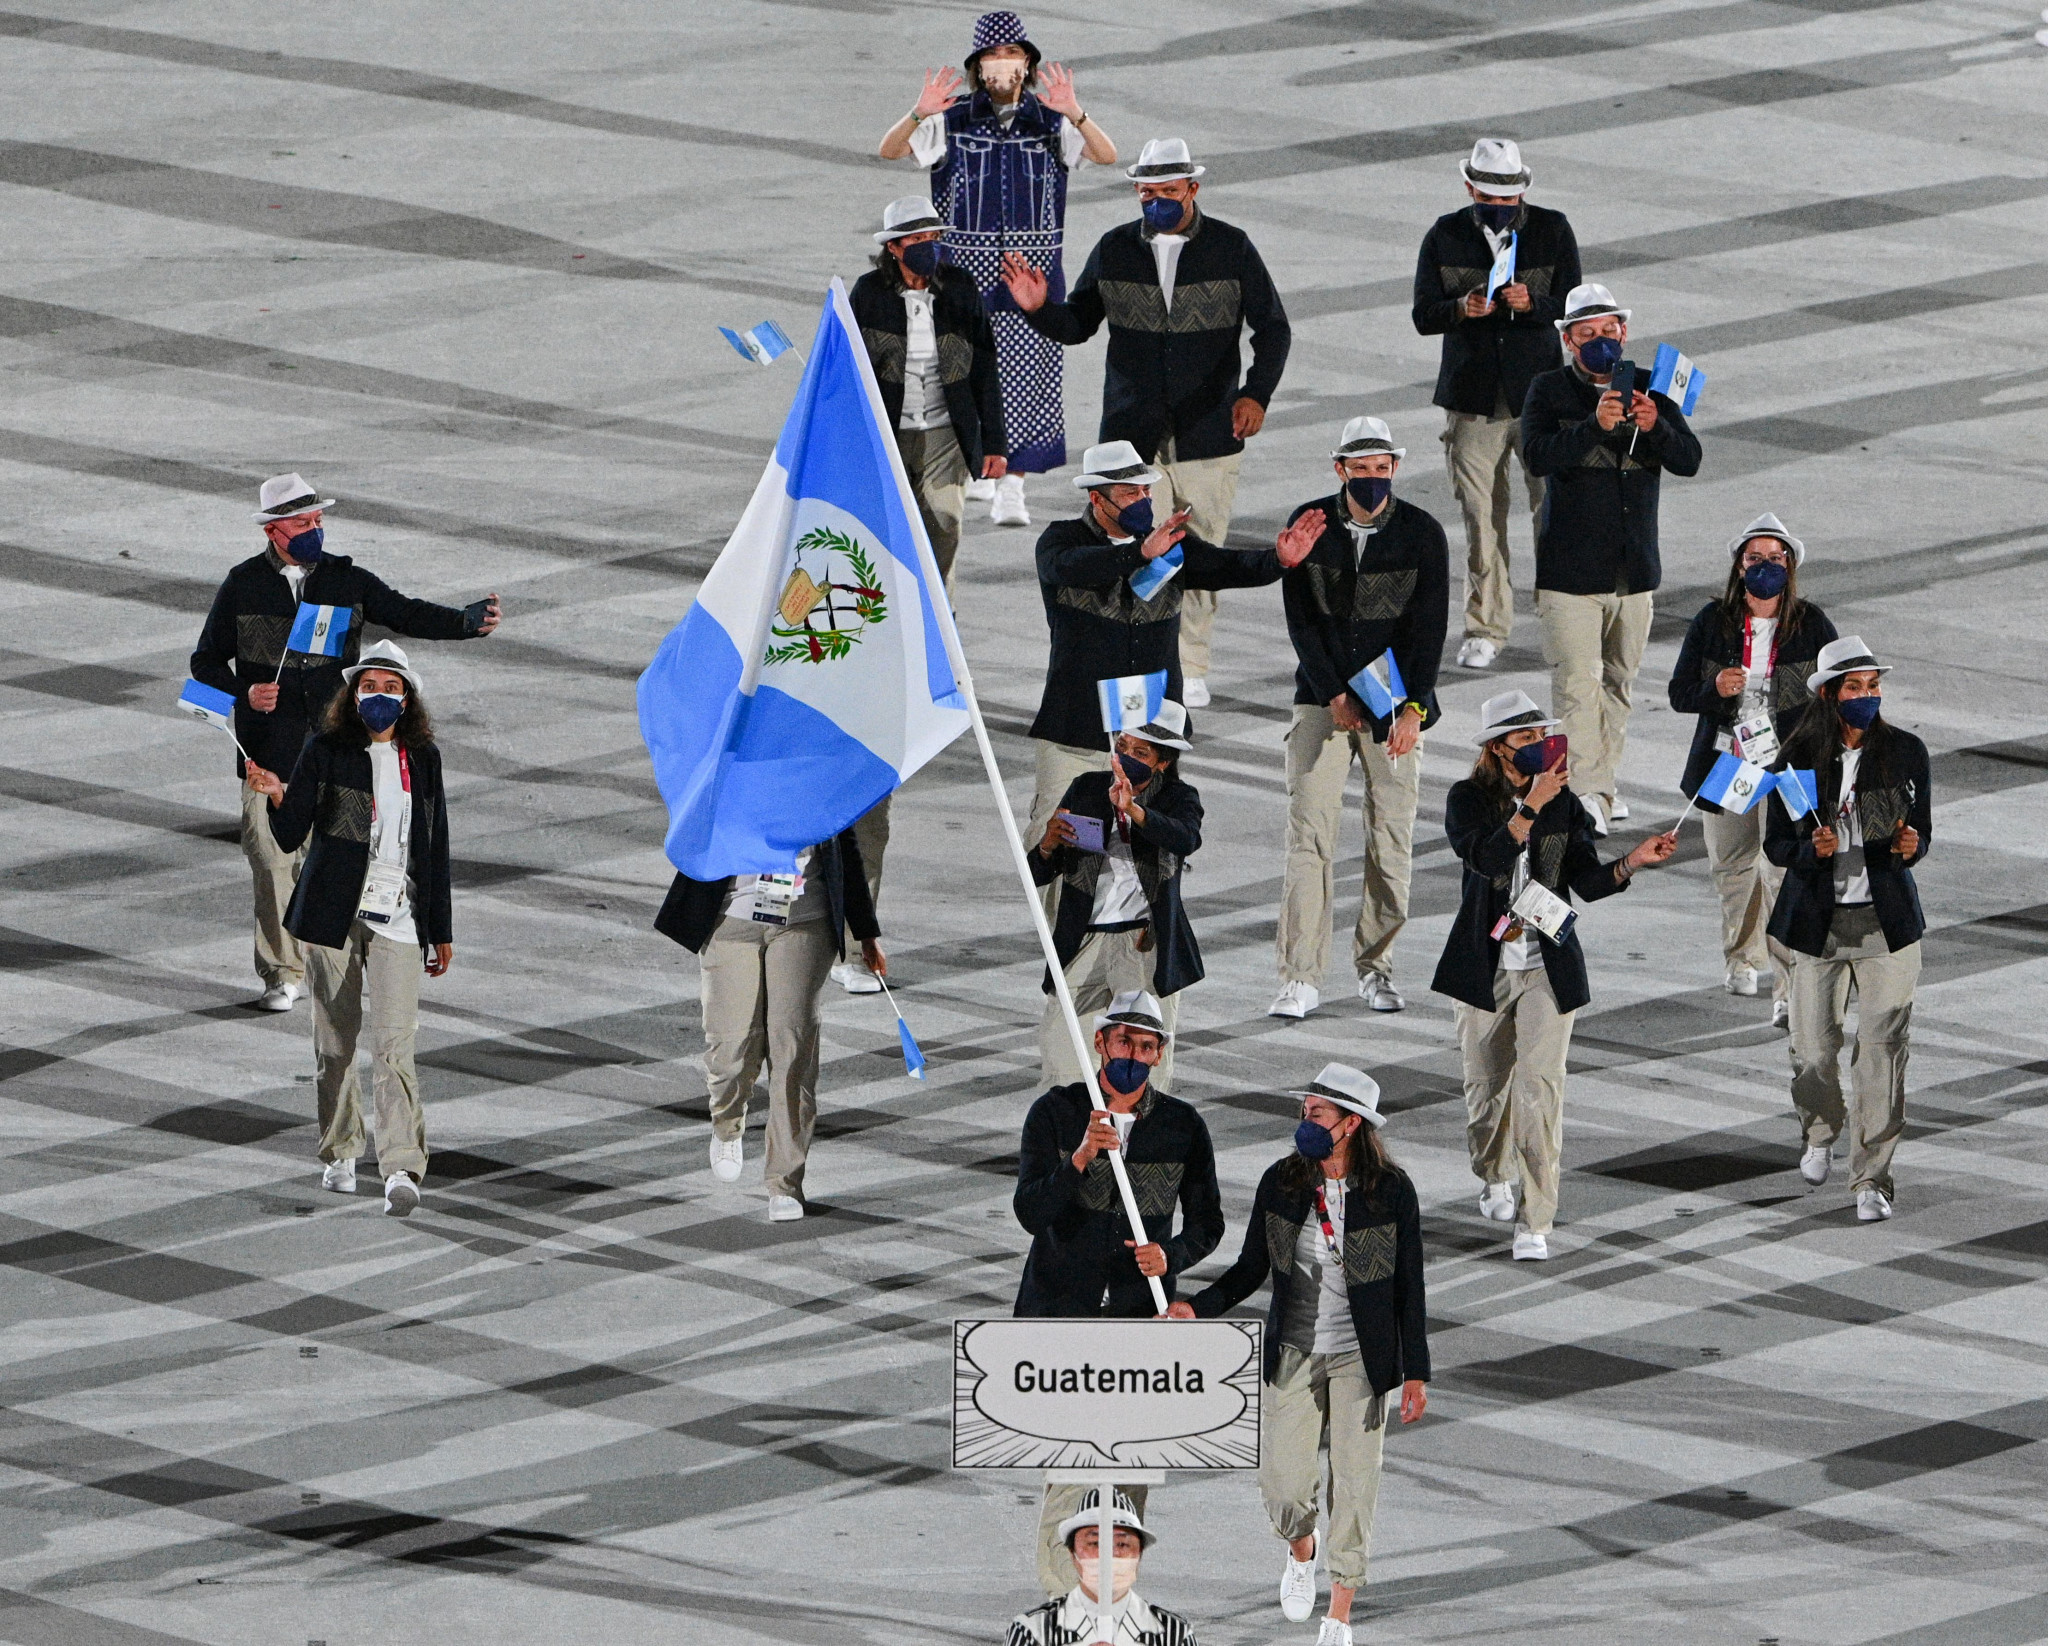 The Guatemalan Olympic Committee faces suspension by the IOC on October 15 if legal issues with its governance are not resolved ©Getty Images